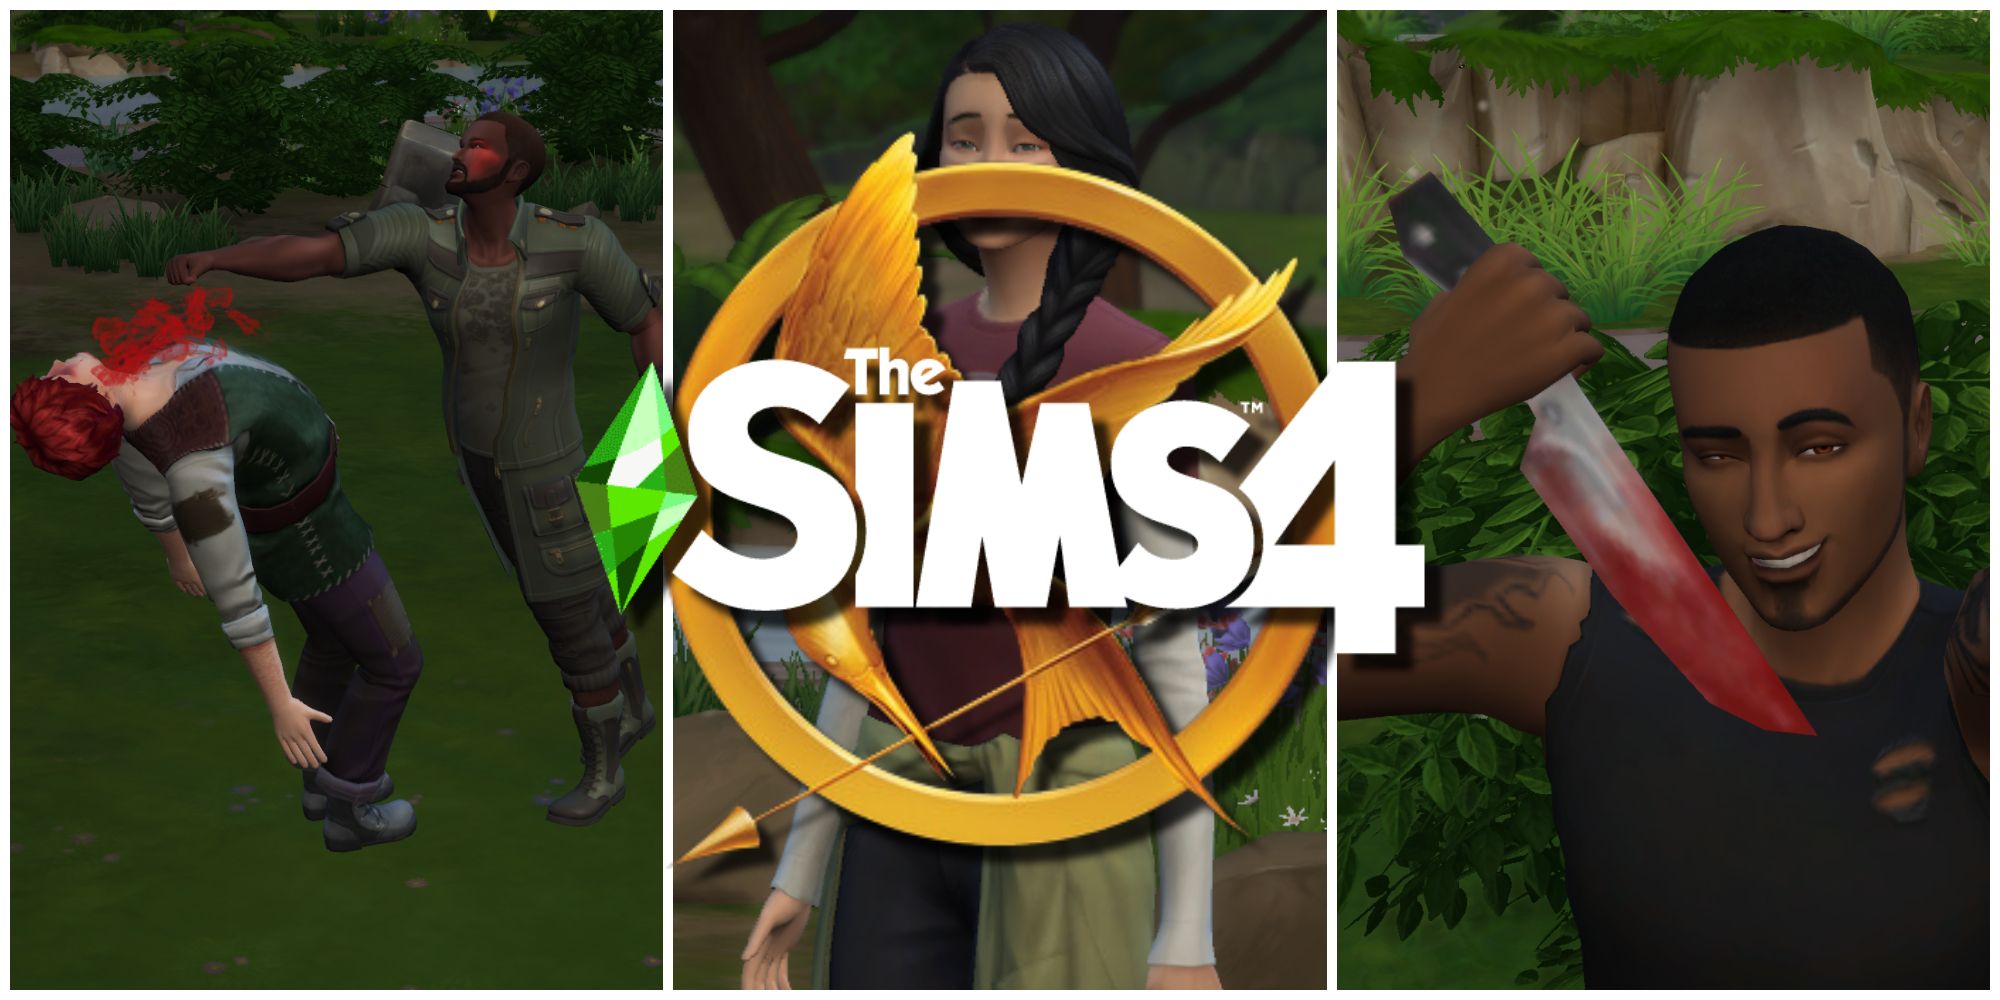 Two Sims are fighting and two Sims are posing for The Hunger Games Legacy Challenge in The Sims 4